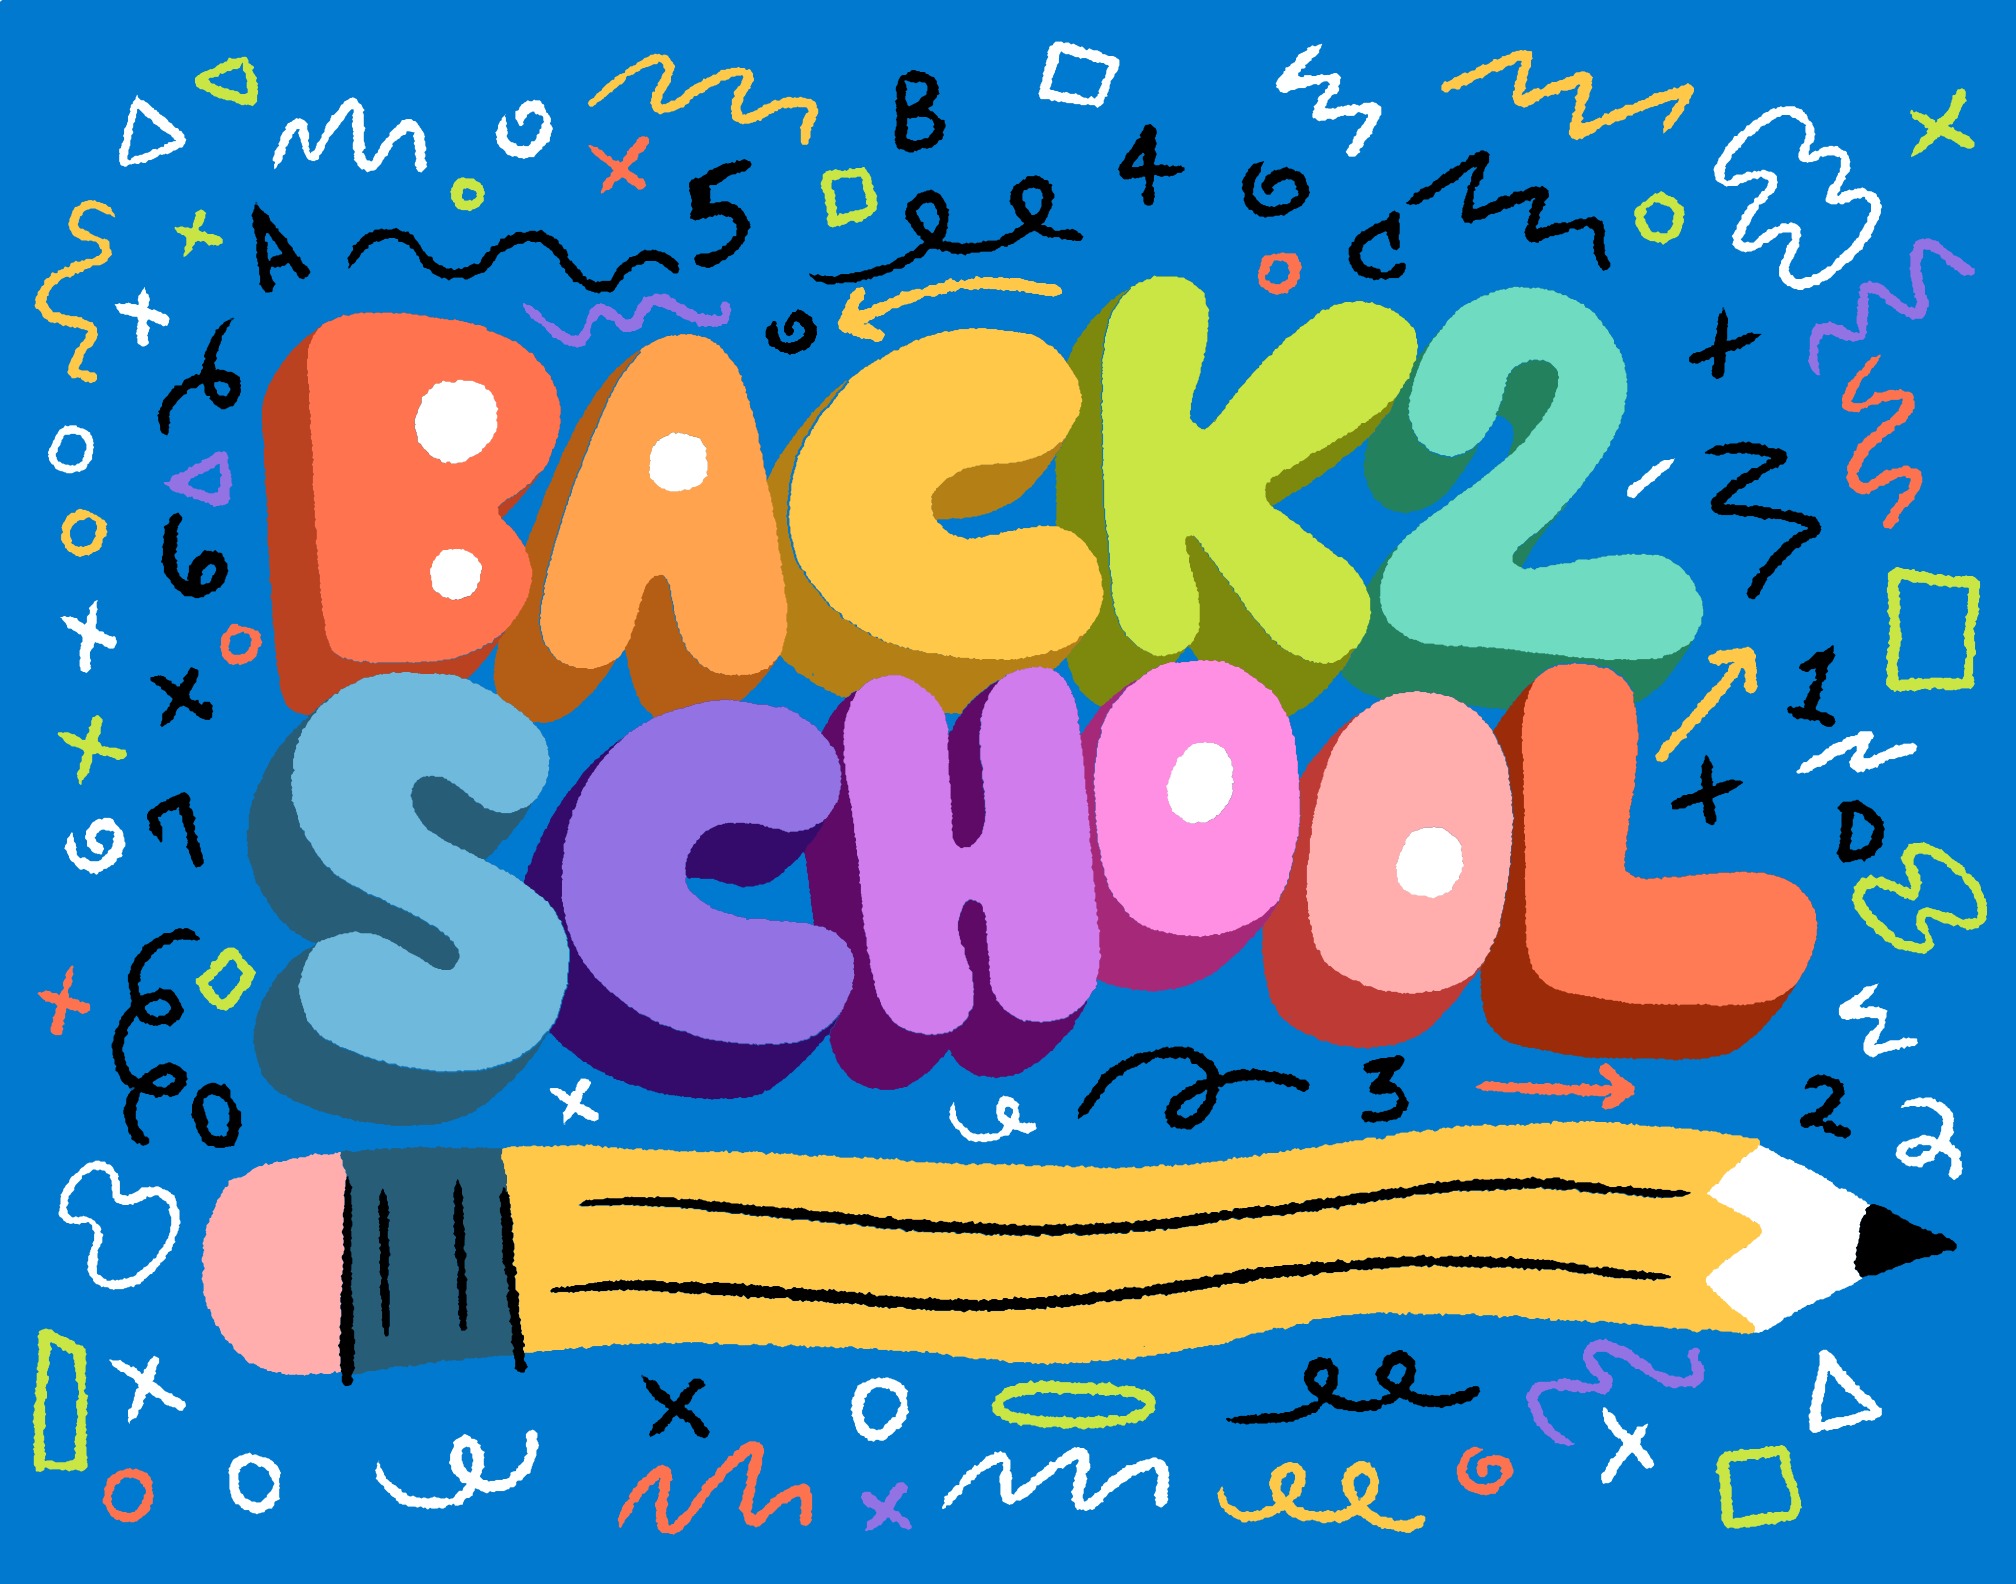 Get back to word. Леттеринг школа. Буквы School. Welcome back to School Letters. Back to School.